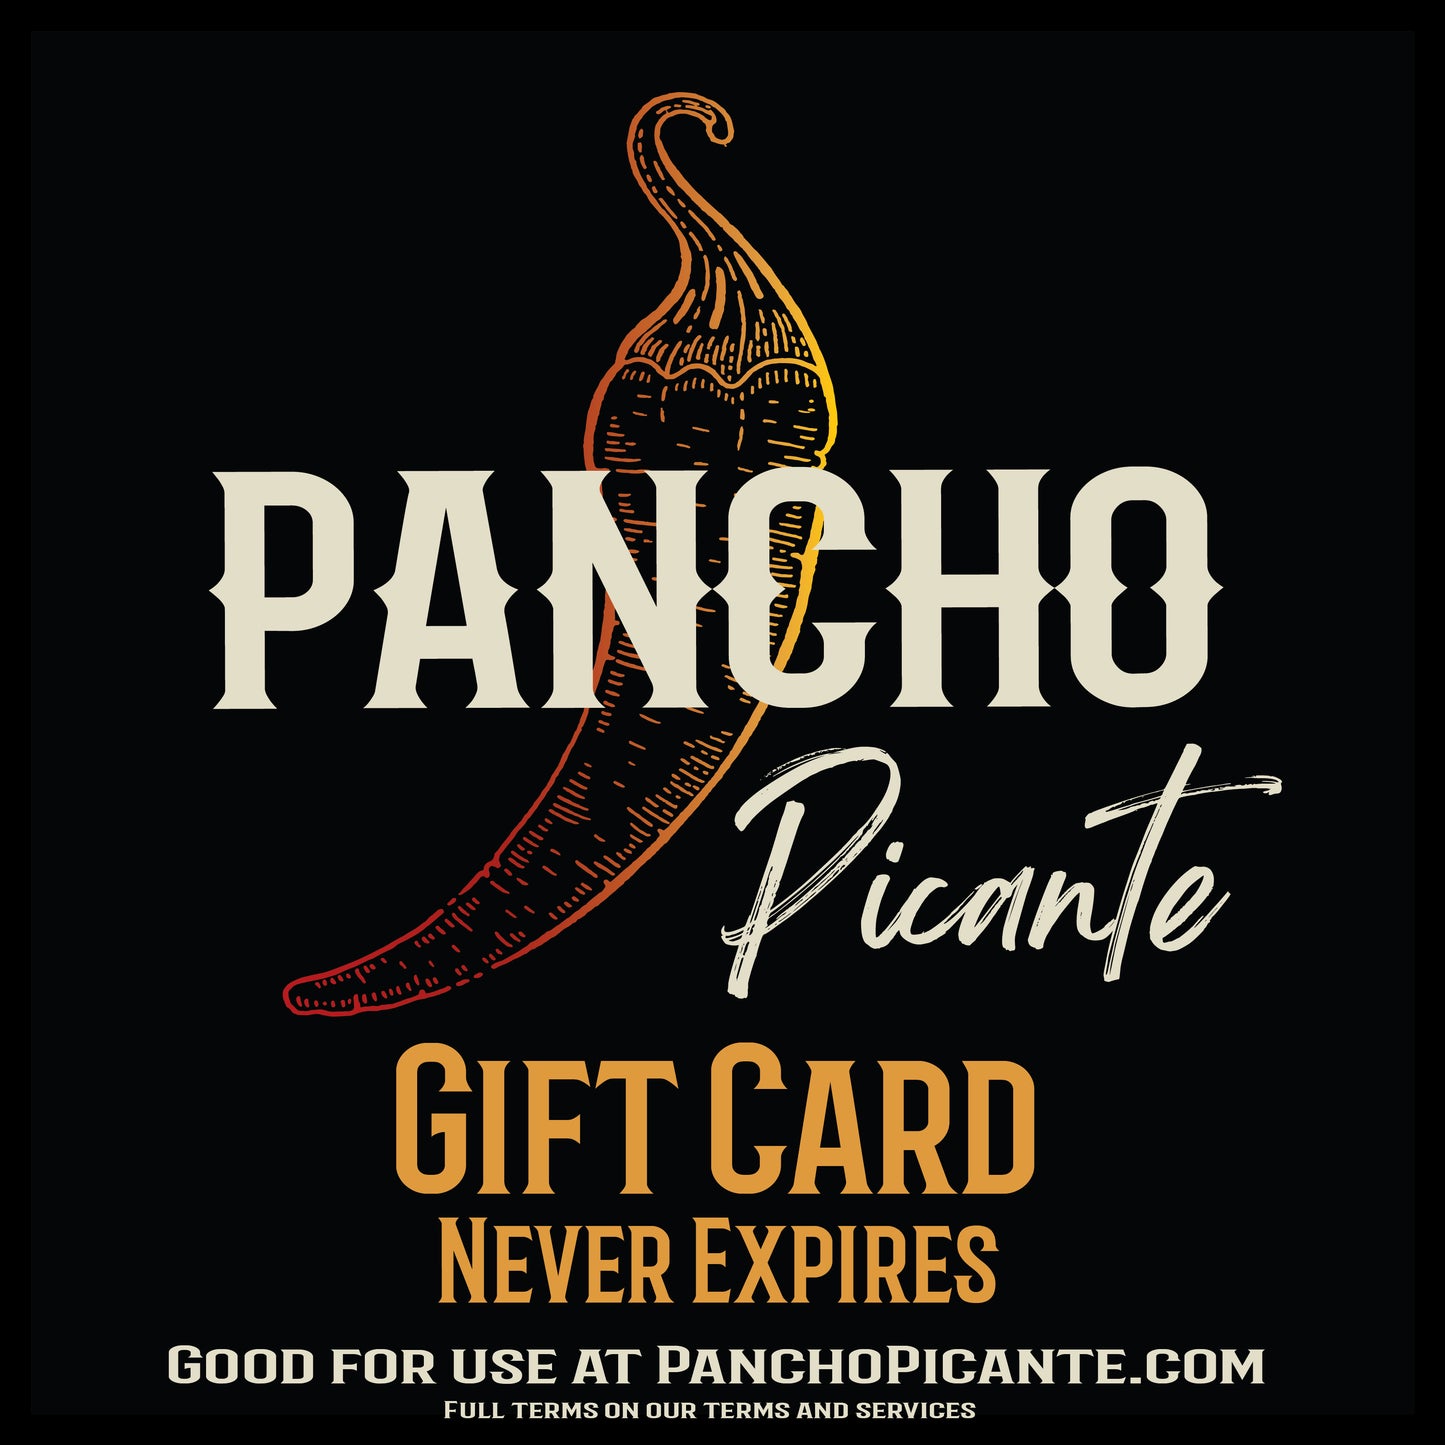 Pancho Picante Gift Card